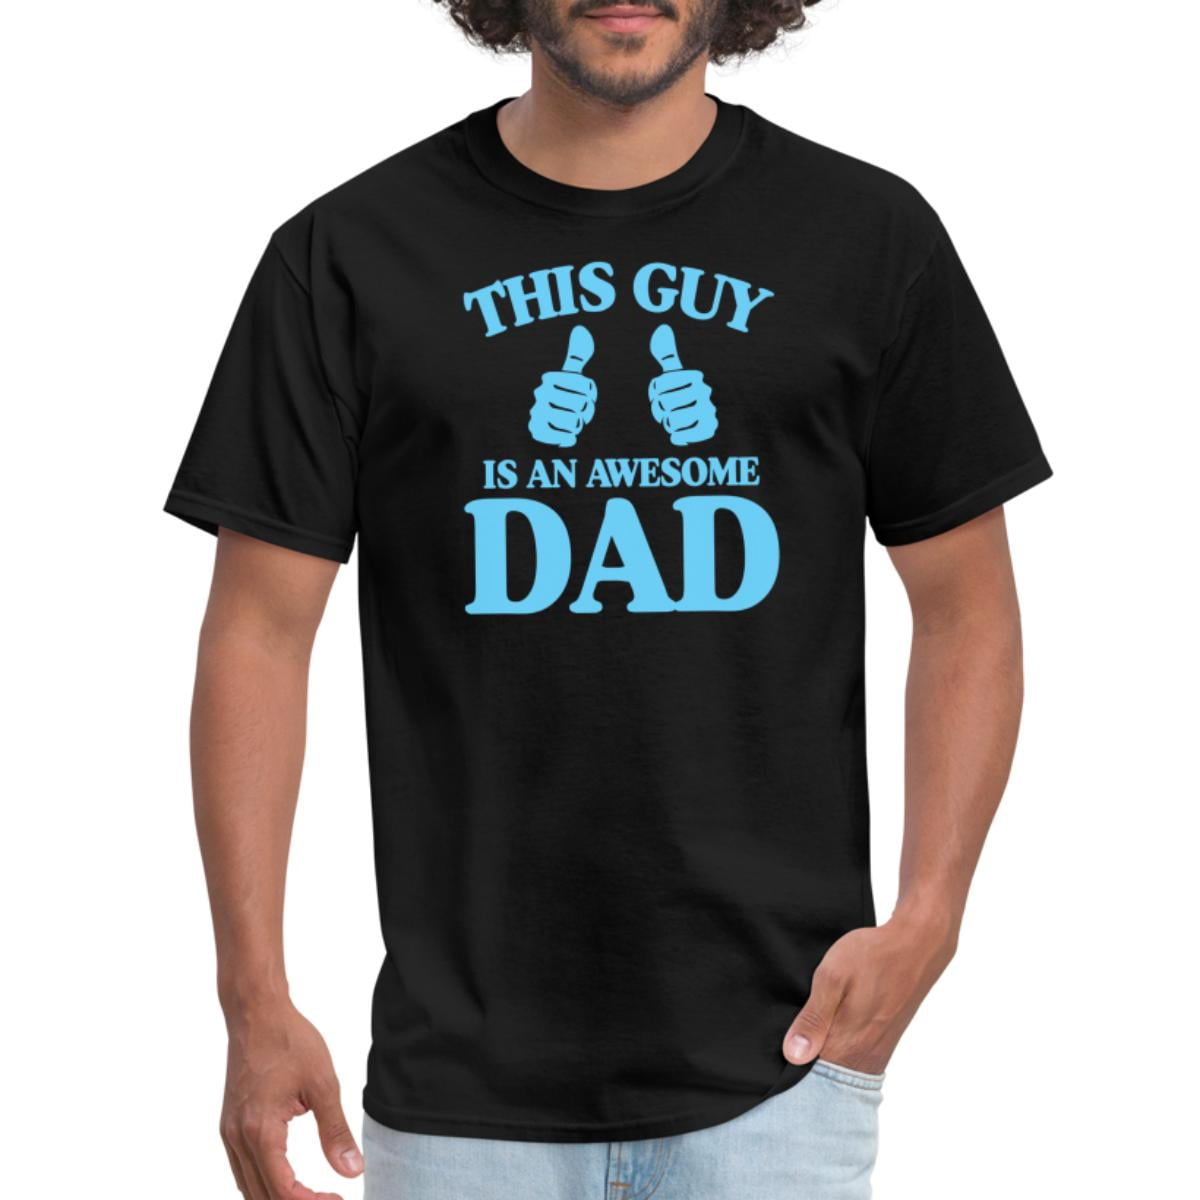 This Guy Is An Awesome Dad Funny Best Dad Gift Unisex Men's Classic T ...